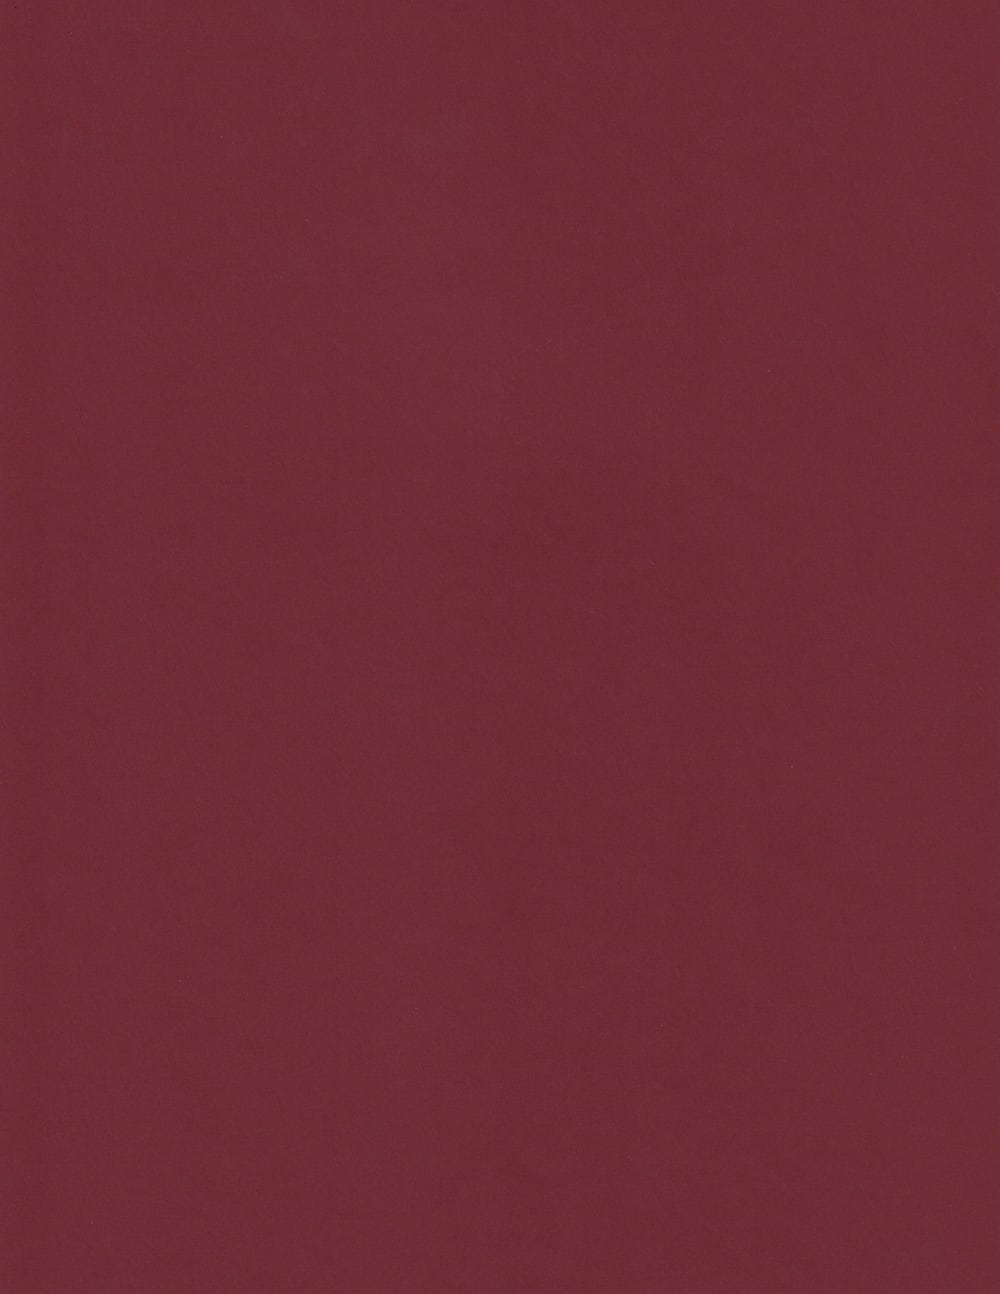 Cherry Sirio | Red Colored Cardstock Paper